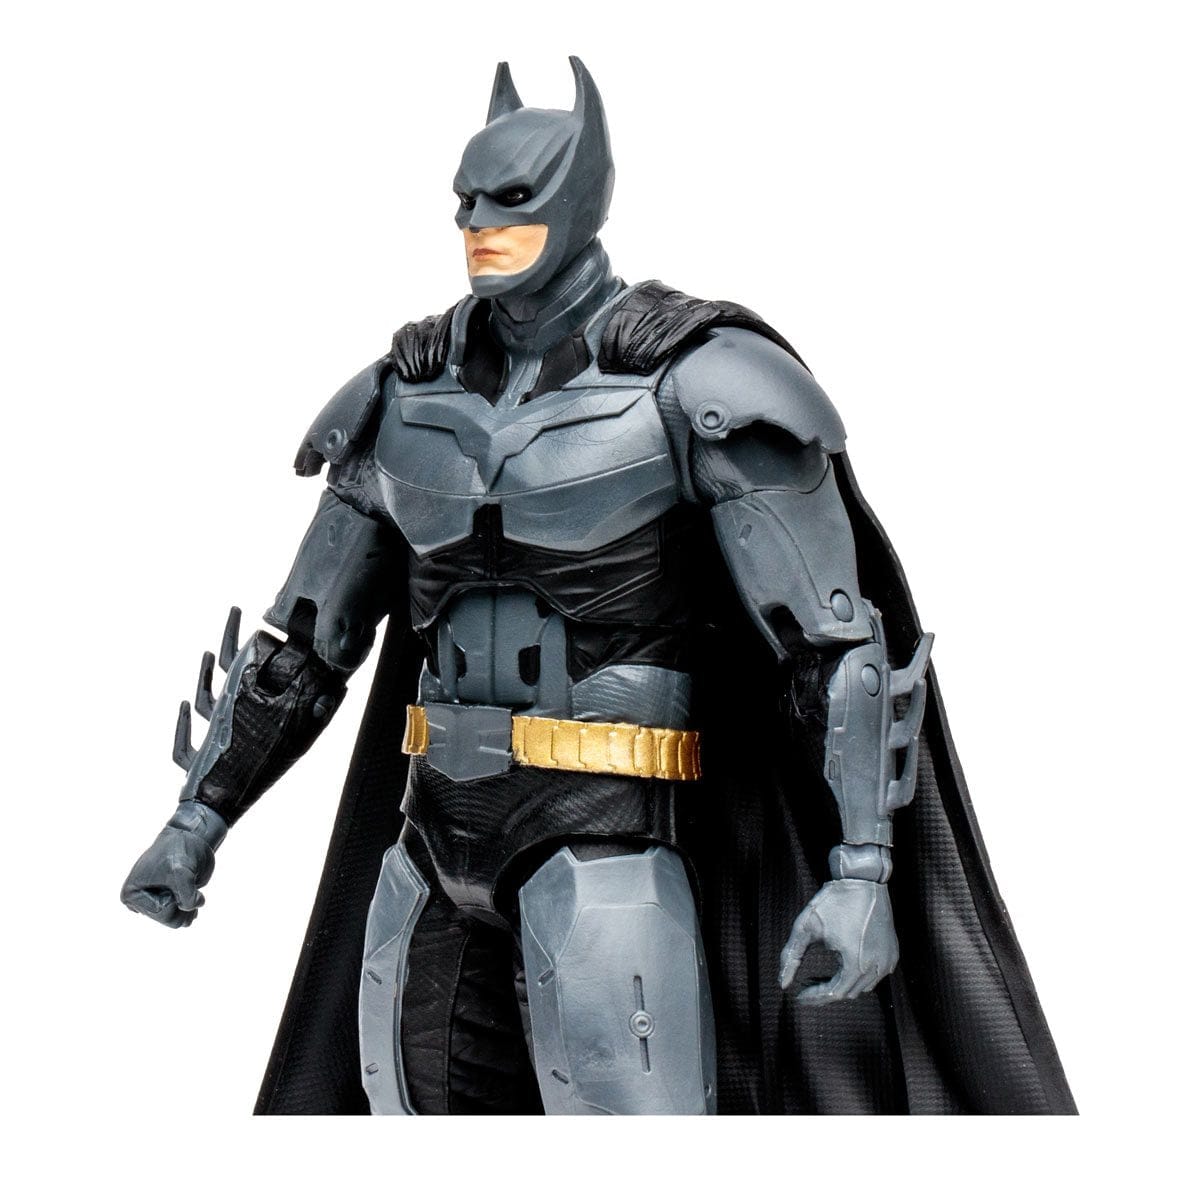 Injustice 2 Batman Page Punchers 7-Inch Scale Action Figure with Injustice Comic Book Figure